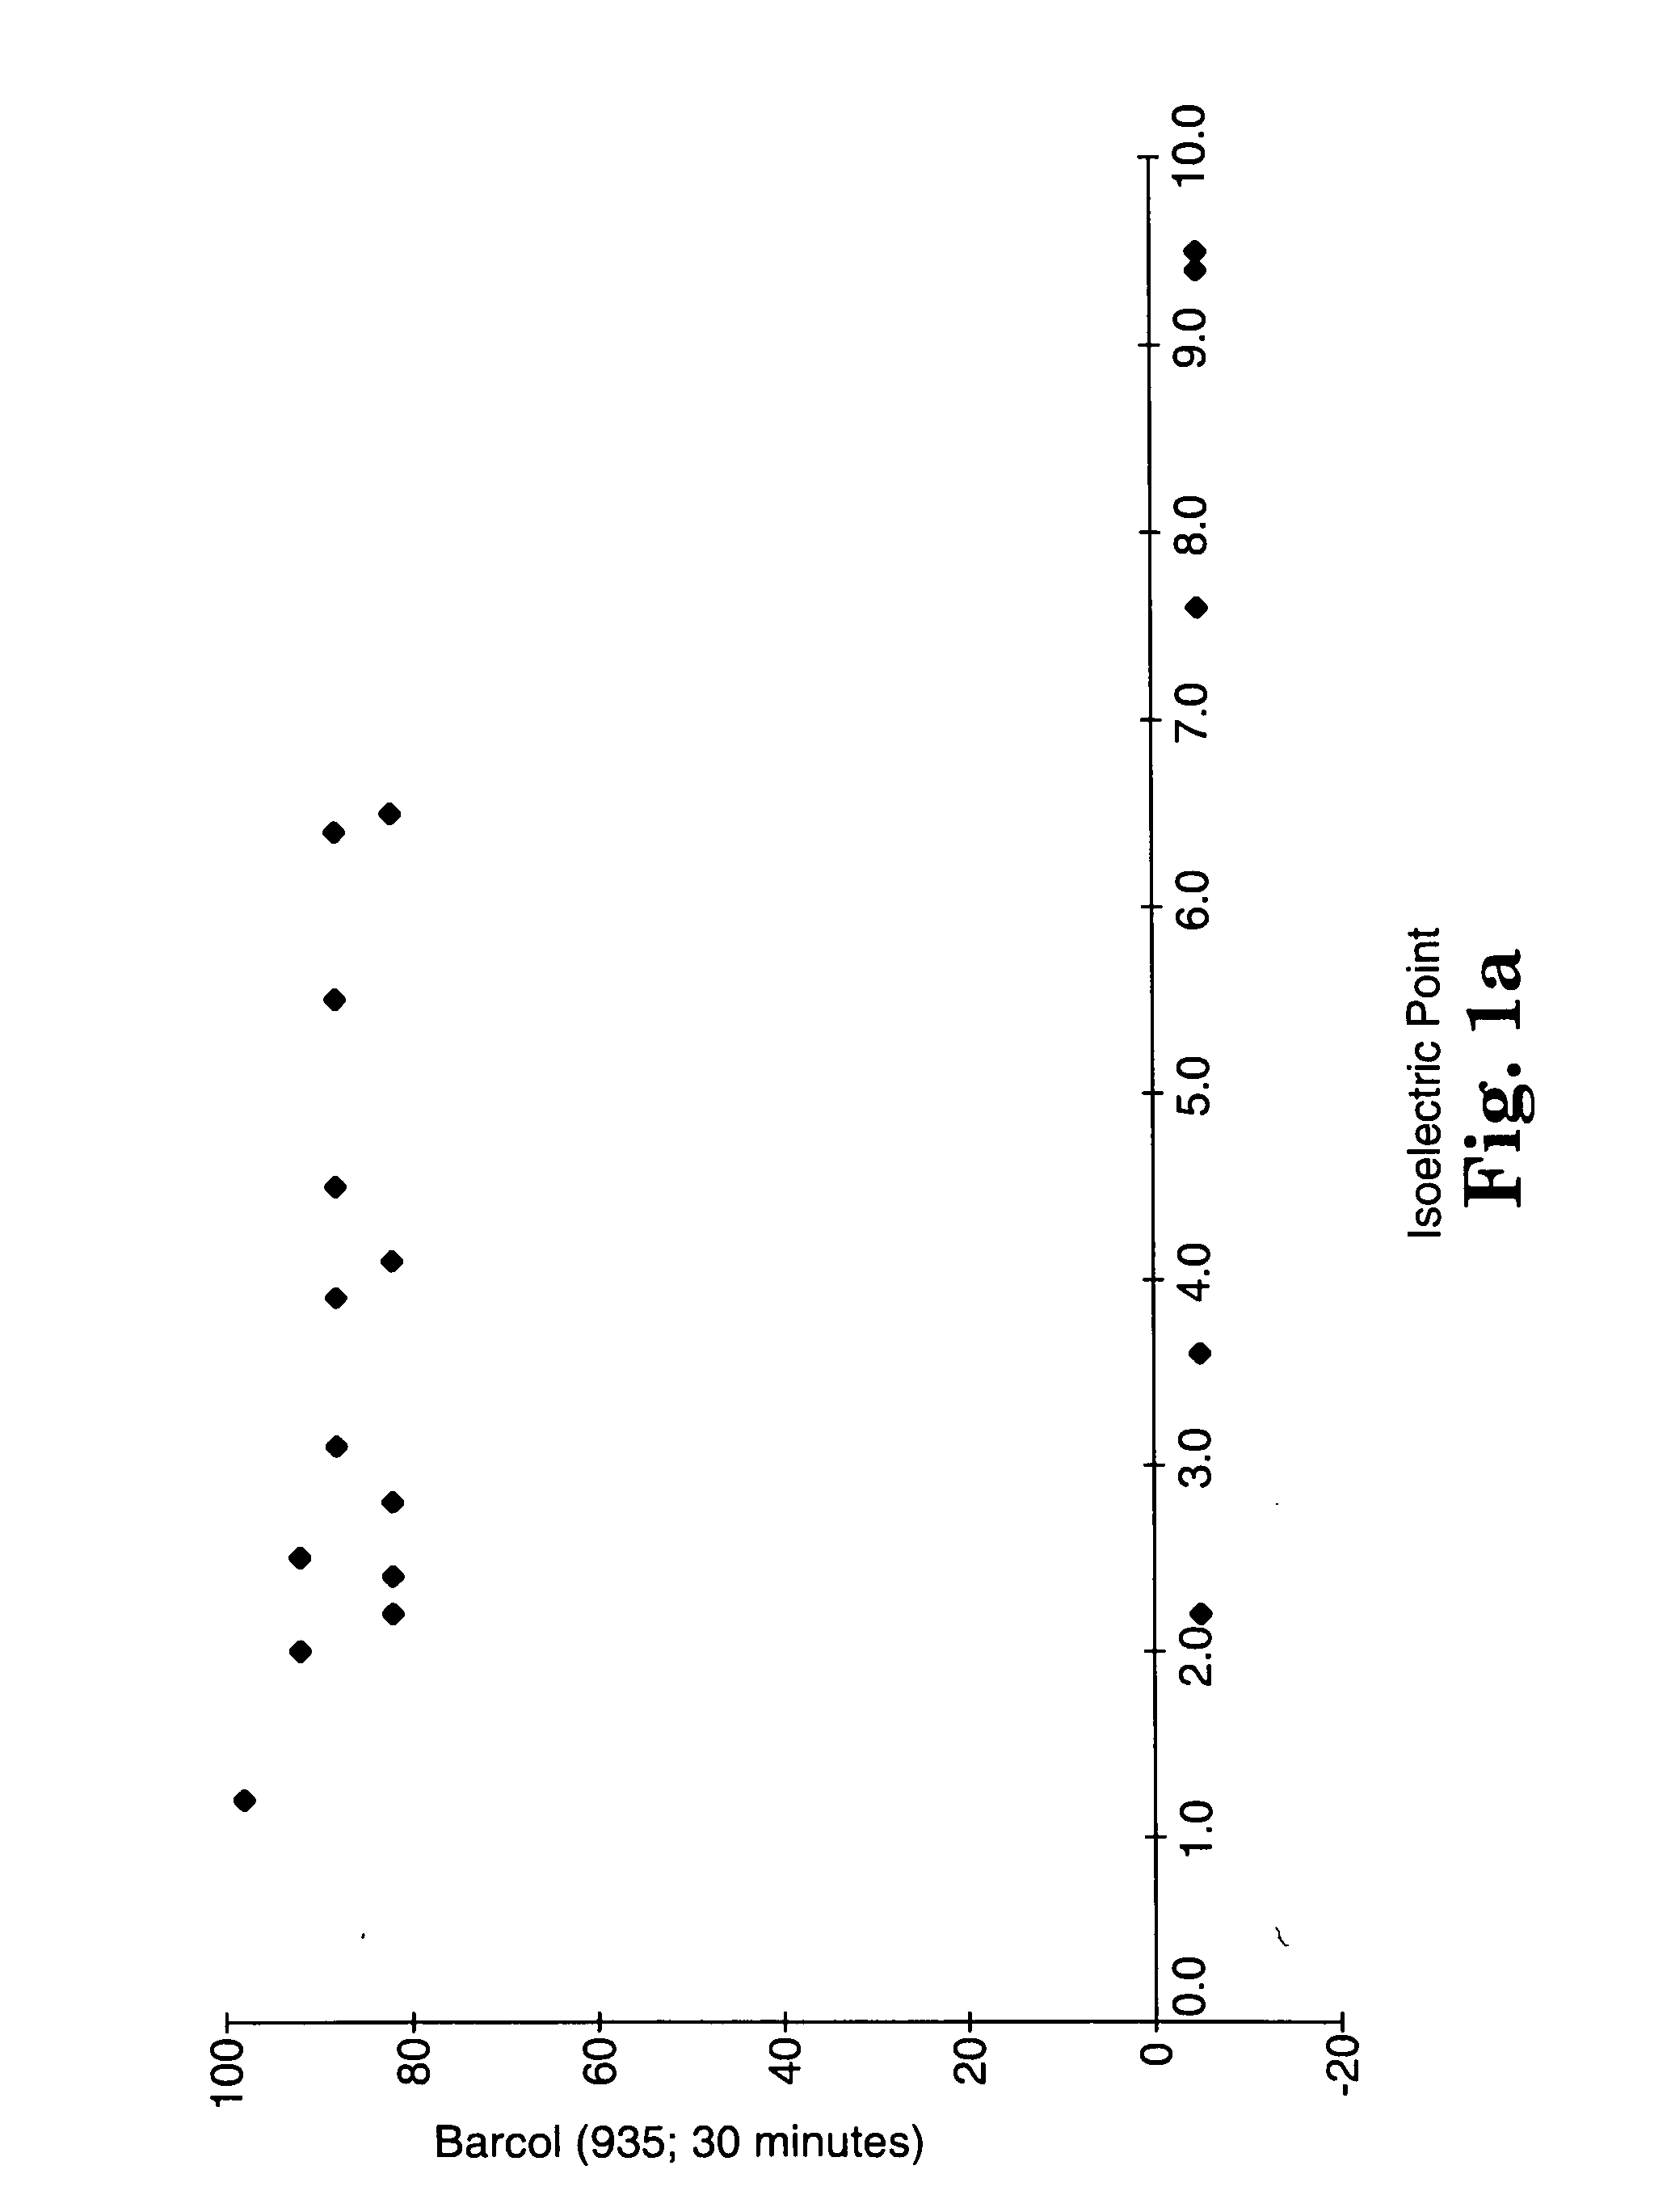 Radiopaque cationically polymerizable compositions comprising a radiopacifying filler, and method for polymerizing same